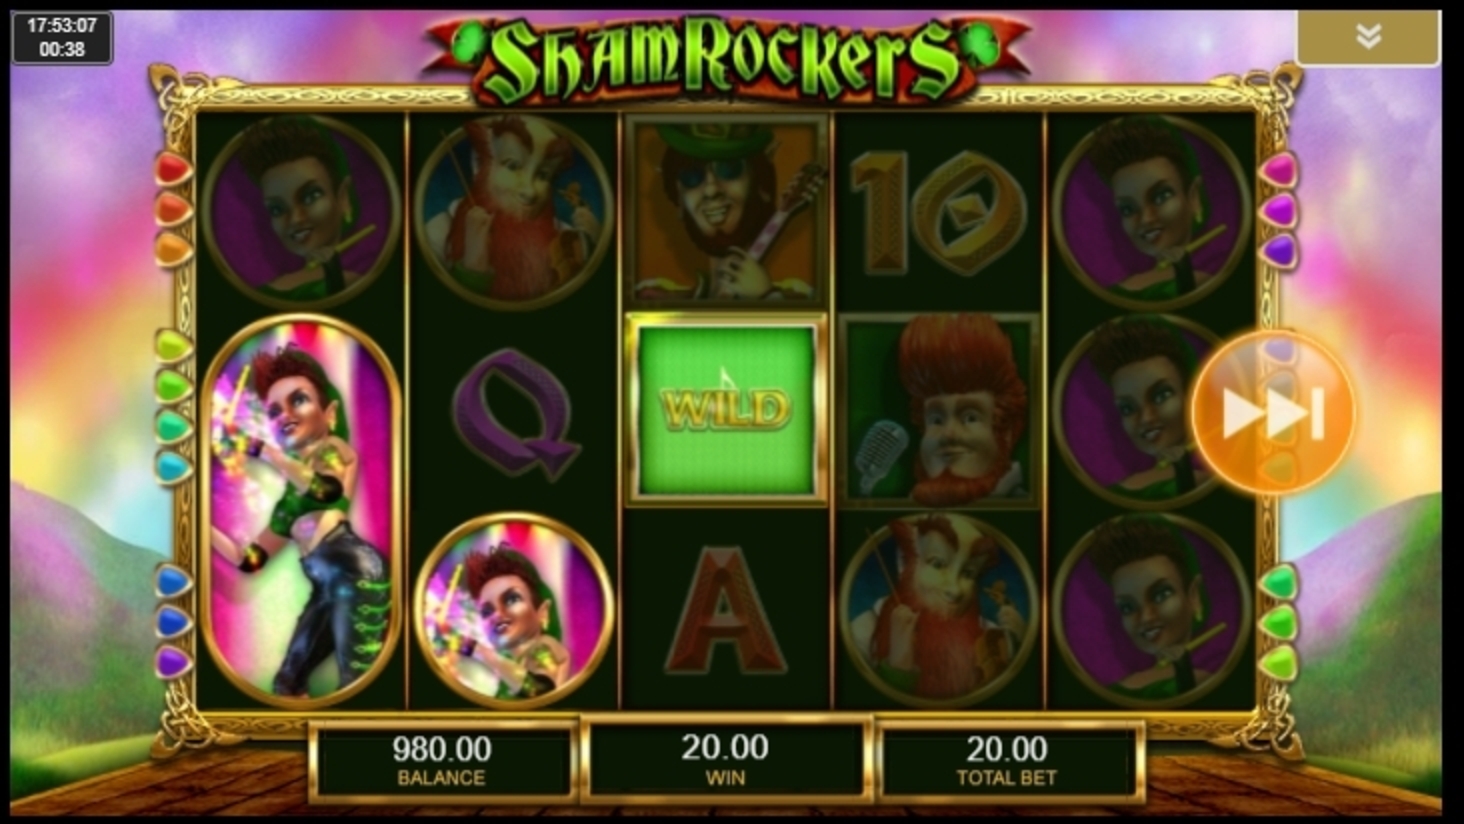 Play Dragons Rock Slot Machine Free With No Download